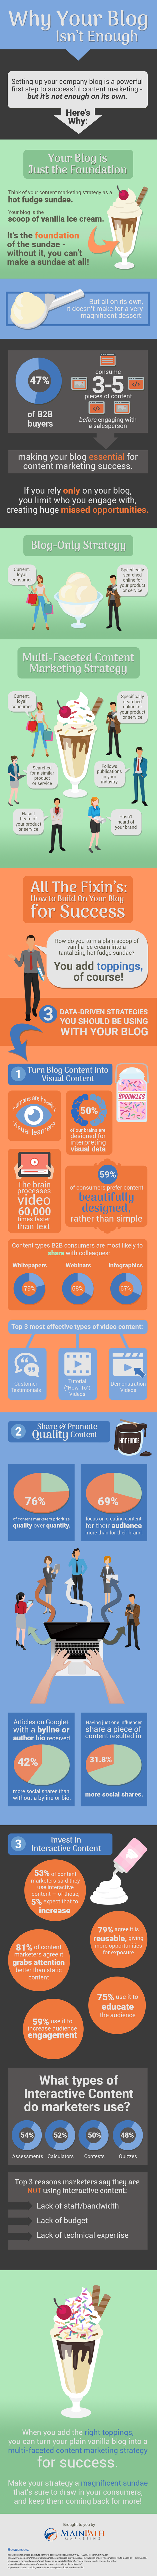 Your Blog Isn't Enough [Infpgraphic]